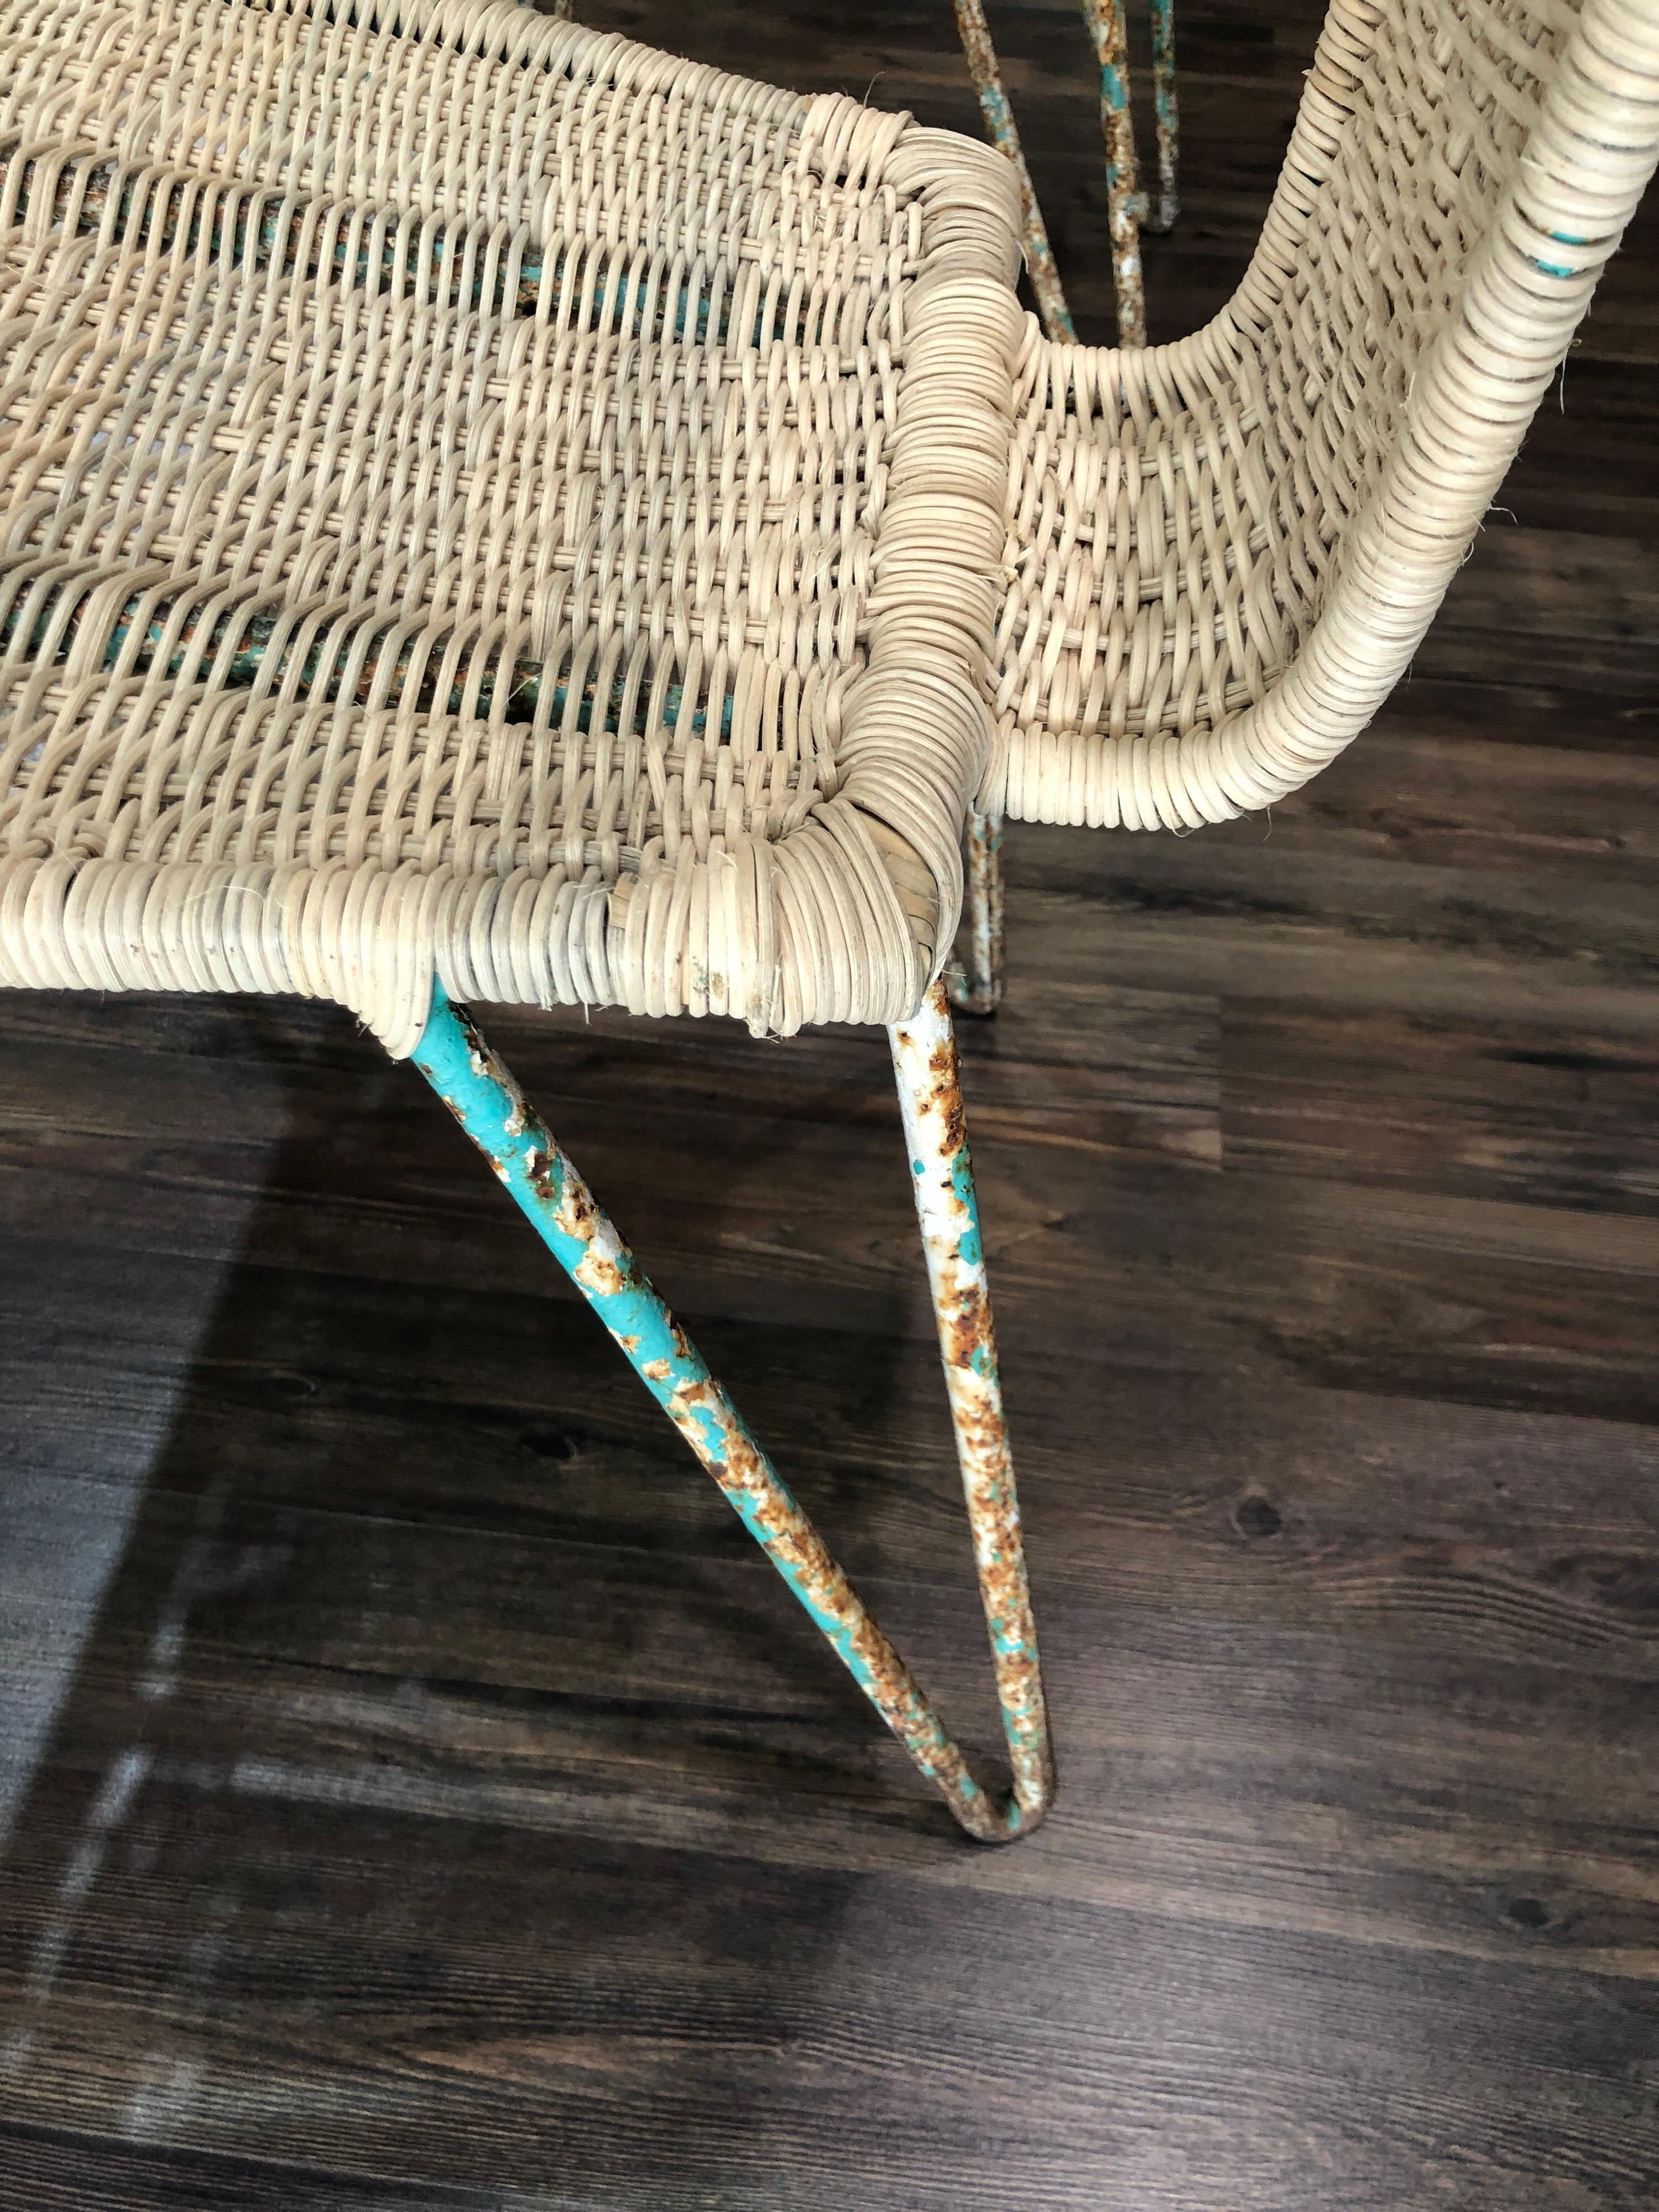 Mexican Iron and Caned Chair In Good Condition For Sale In San Pedro Garza Garcia, Nuevo Leon